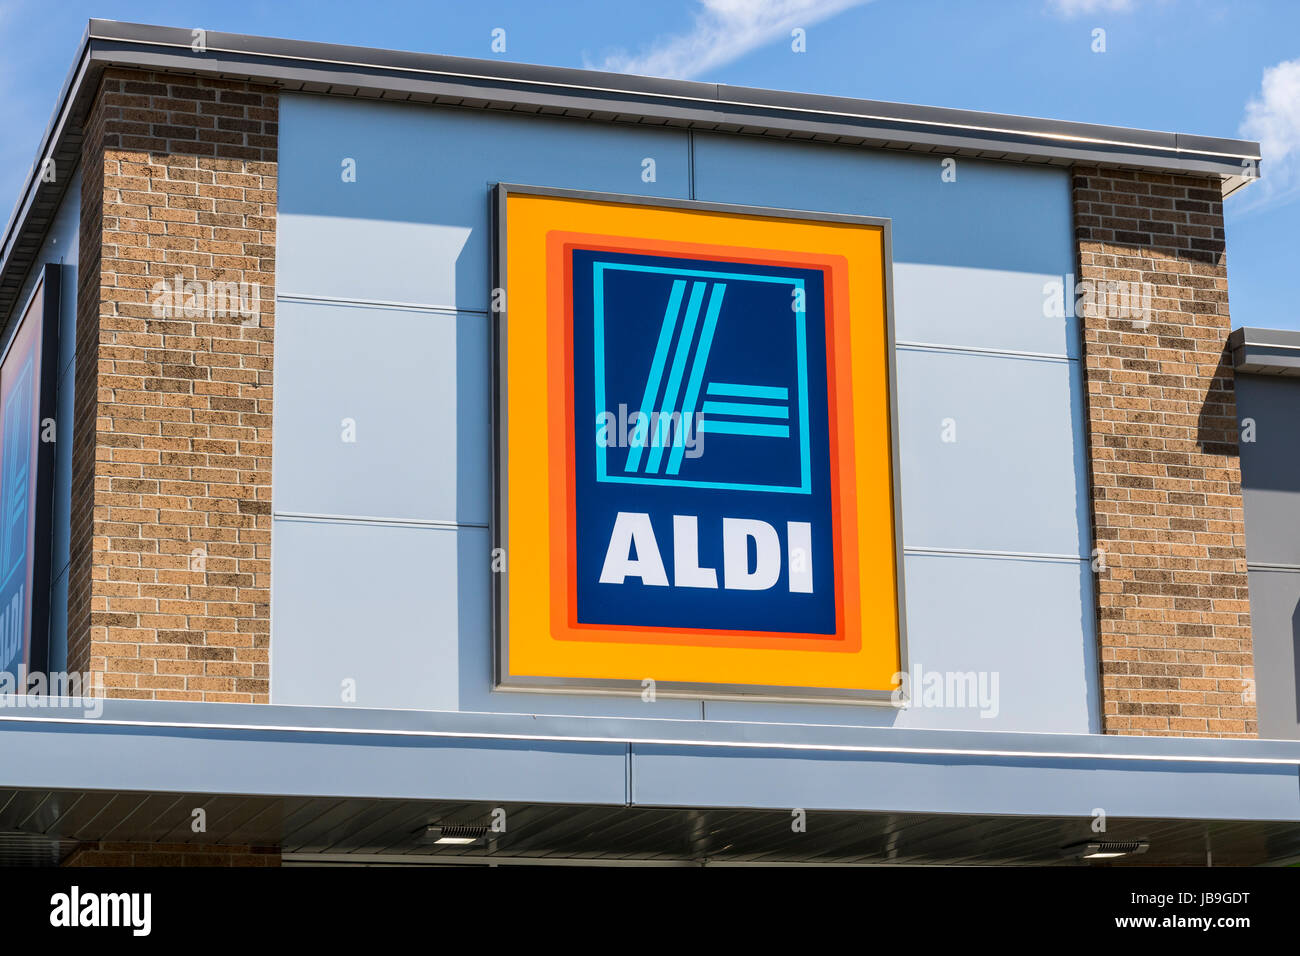 Indianapolis - Circa June 2017: Aldi Discount Supermarket. Aldi sells a range of grocery items, including produce, meat & dairy, at discount prices VI Stock Photo